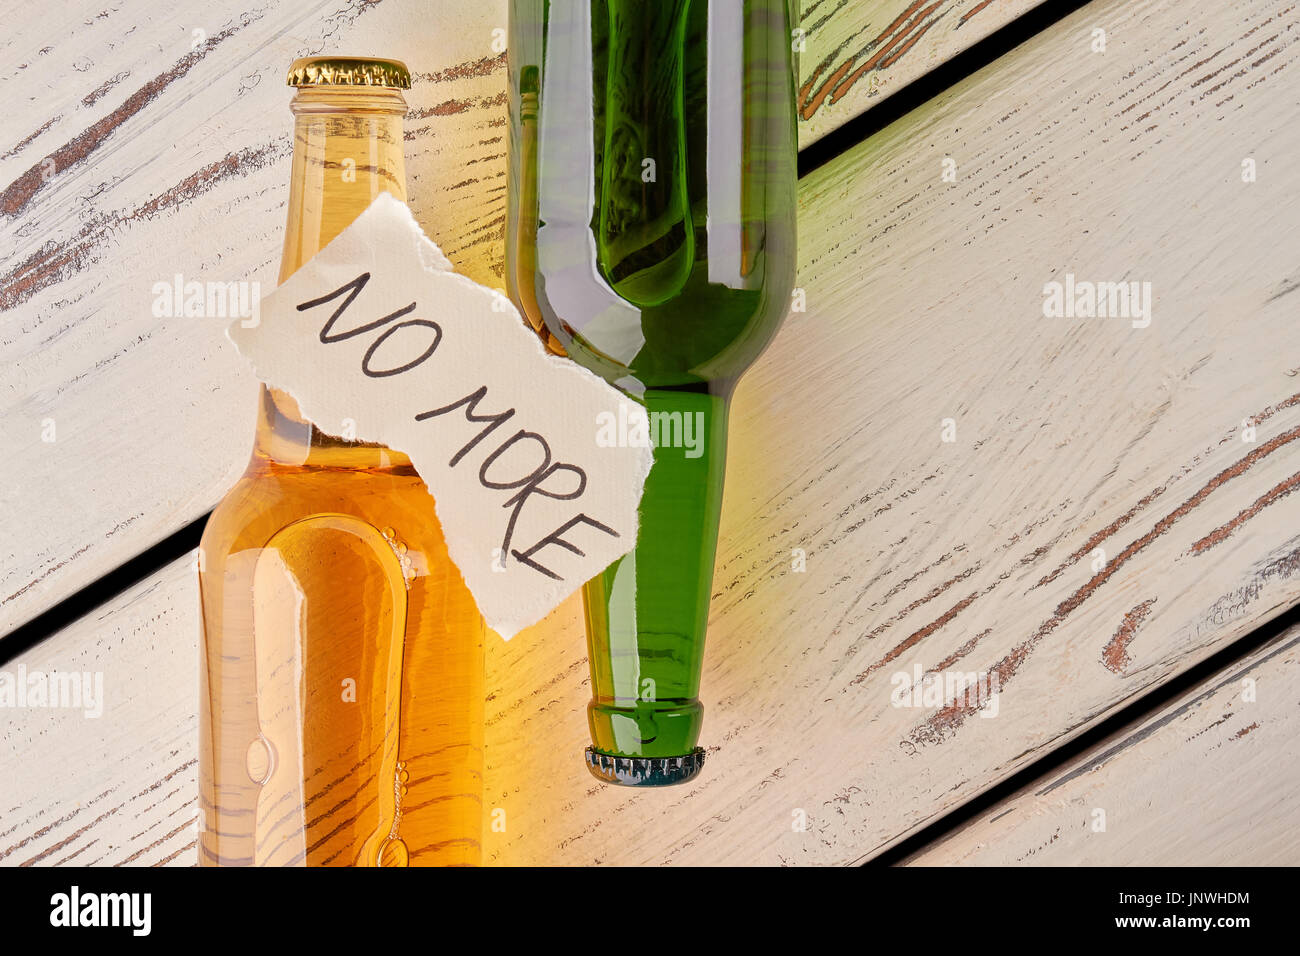 Alcohol abuse, how to stop. Stock Photo